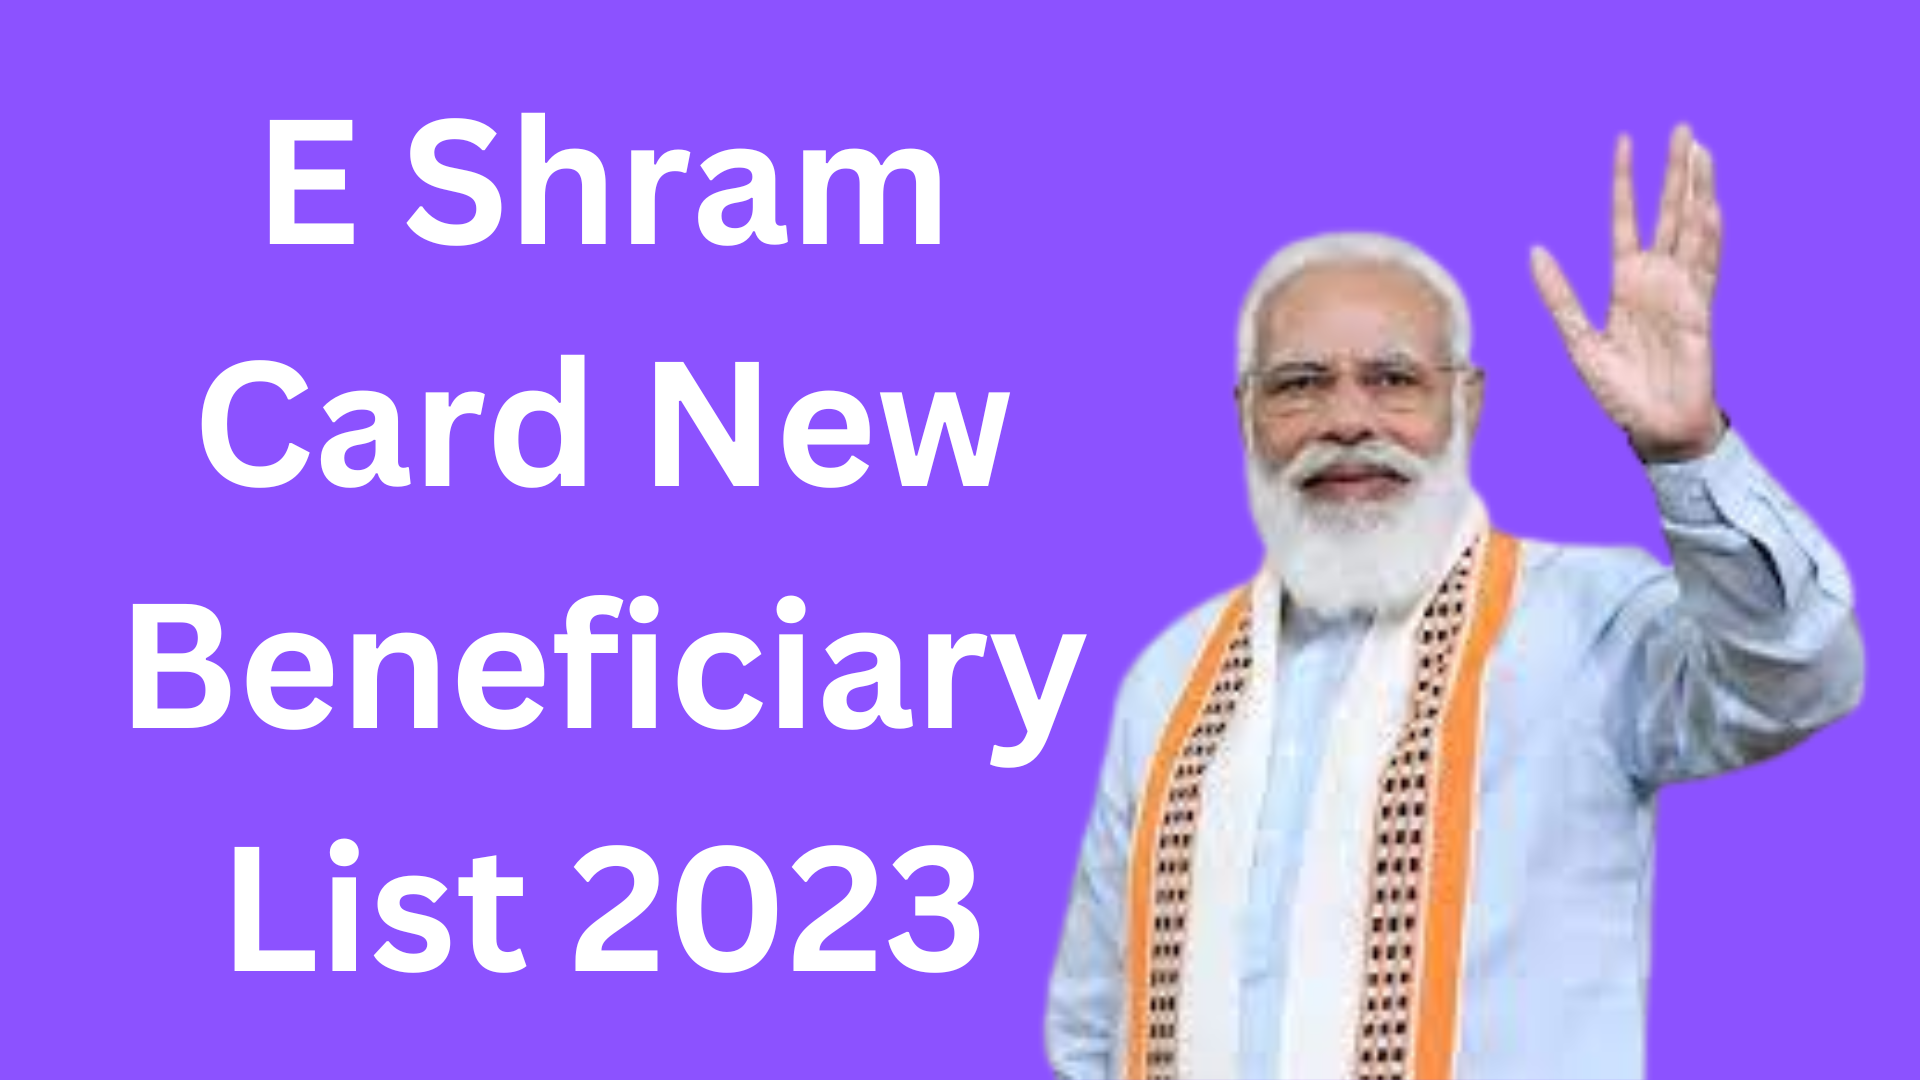 E Shram Card New Beneficiary List 2023: If your name is in this list then you will get 3000 rupees, check from this Detect Link